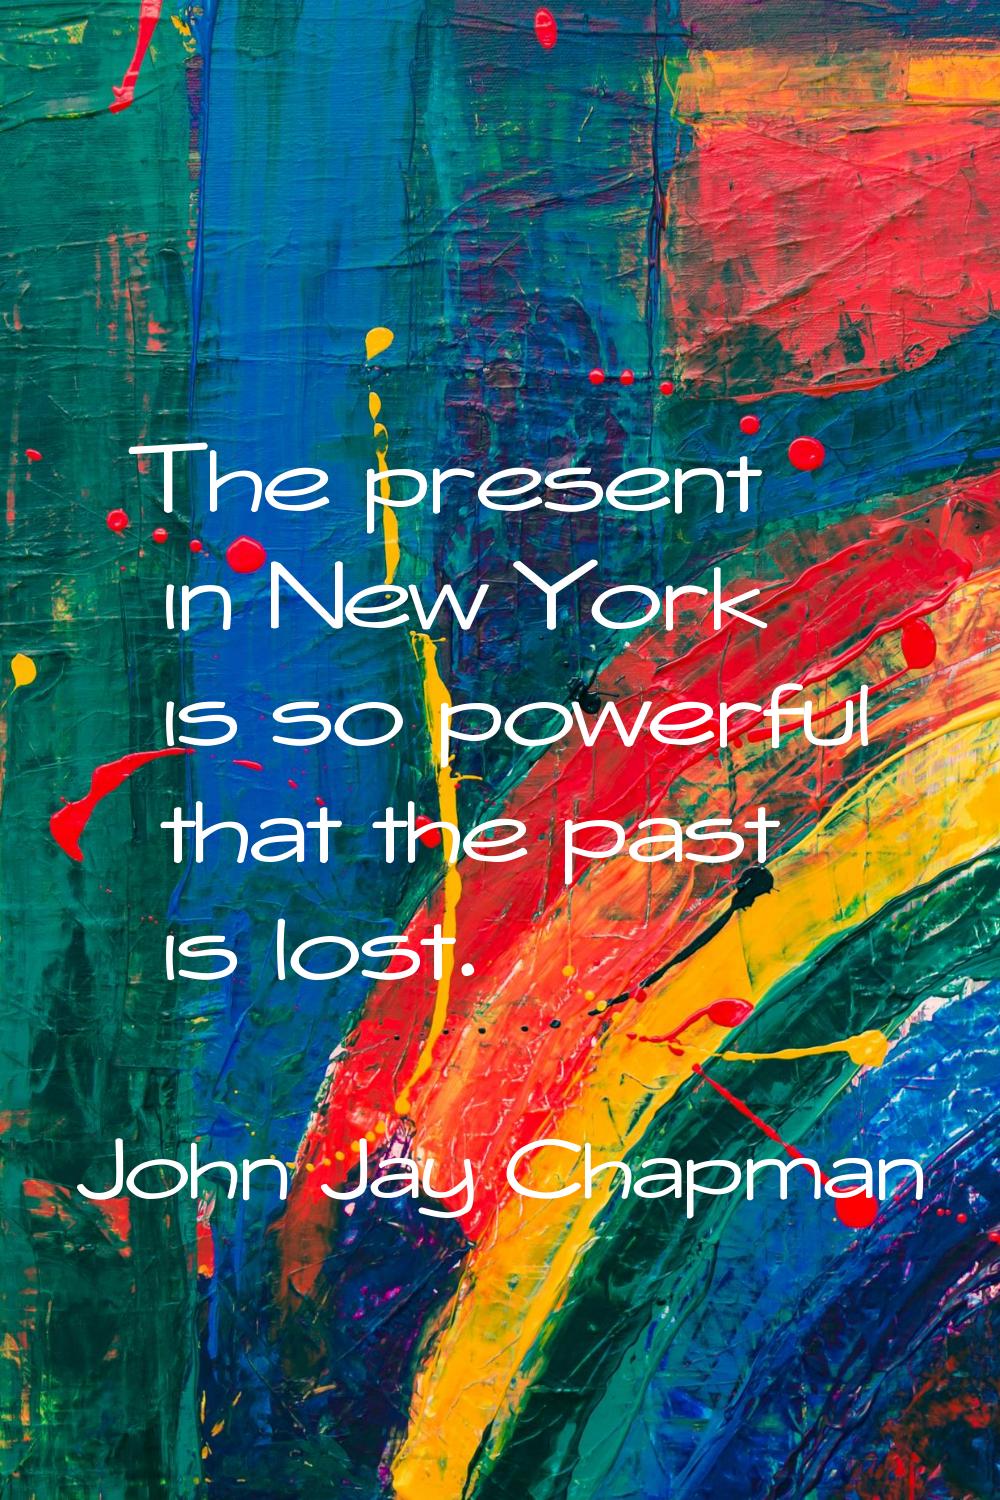 The present in New York is so powerful that the past is lost.